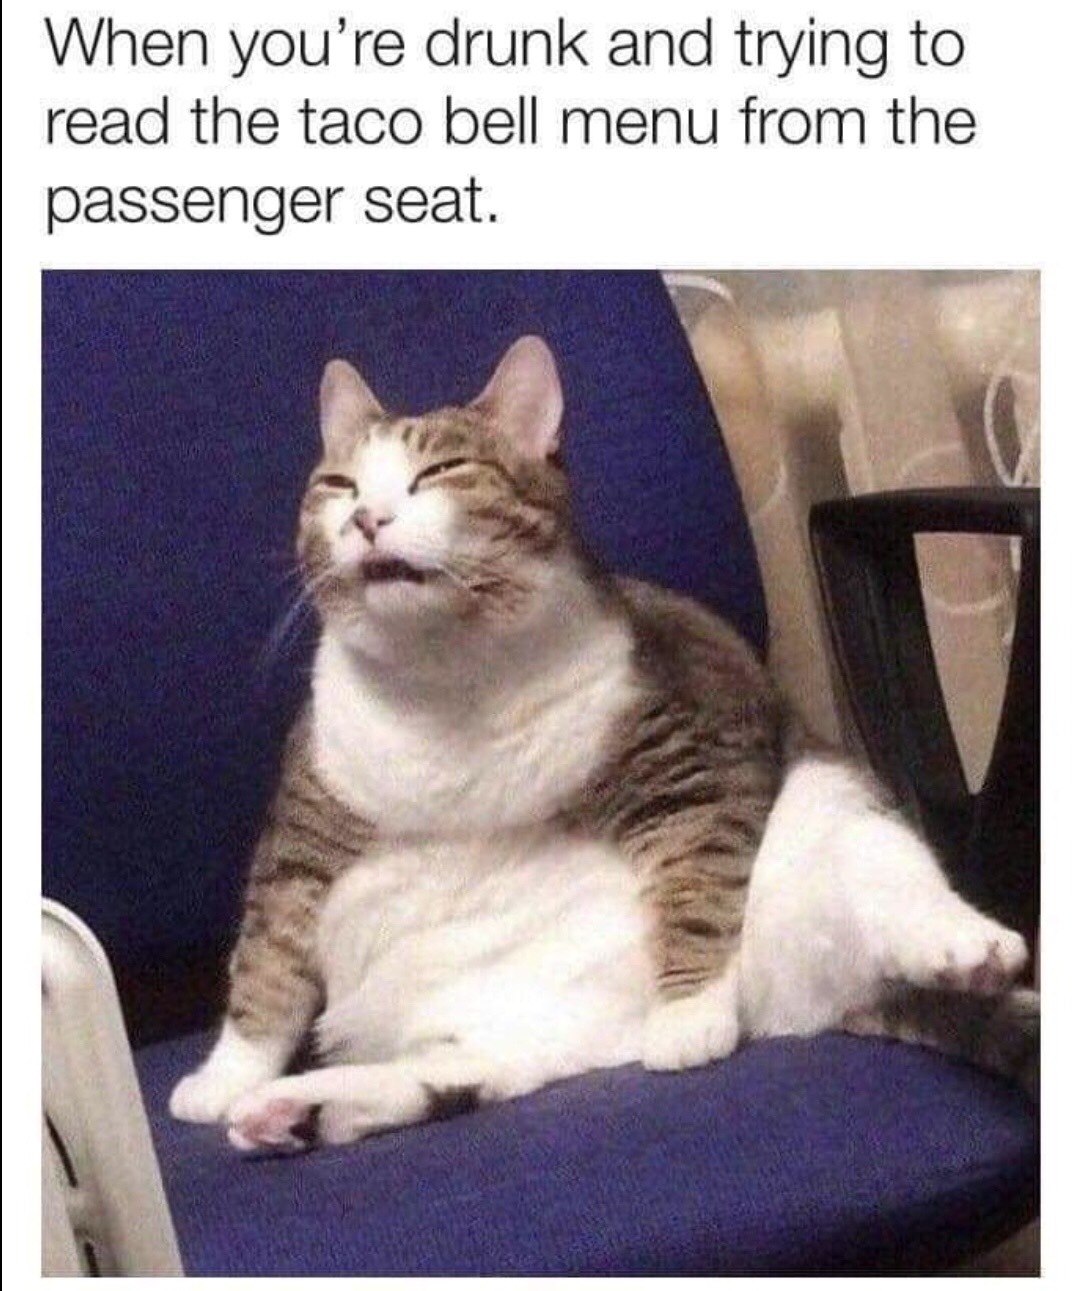 taco bell meme - When you're drunk and trying to read the taco bell menu from the passenger seat.